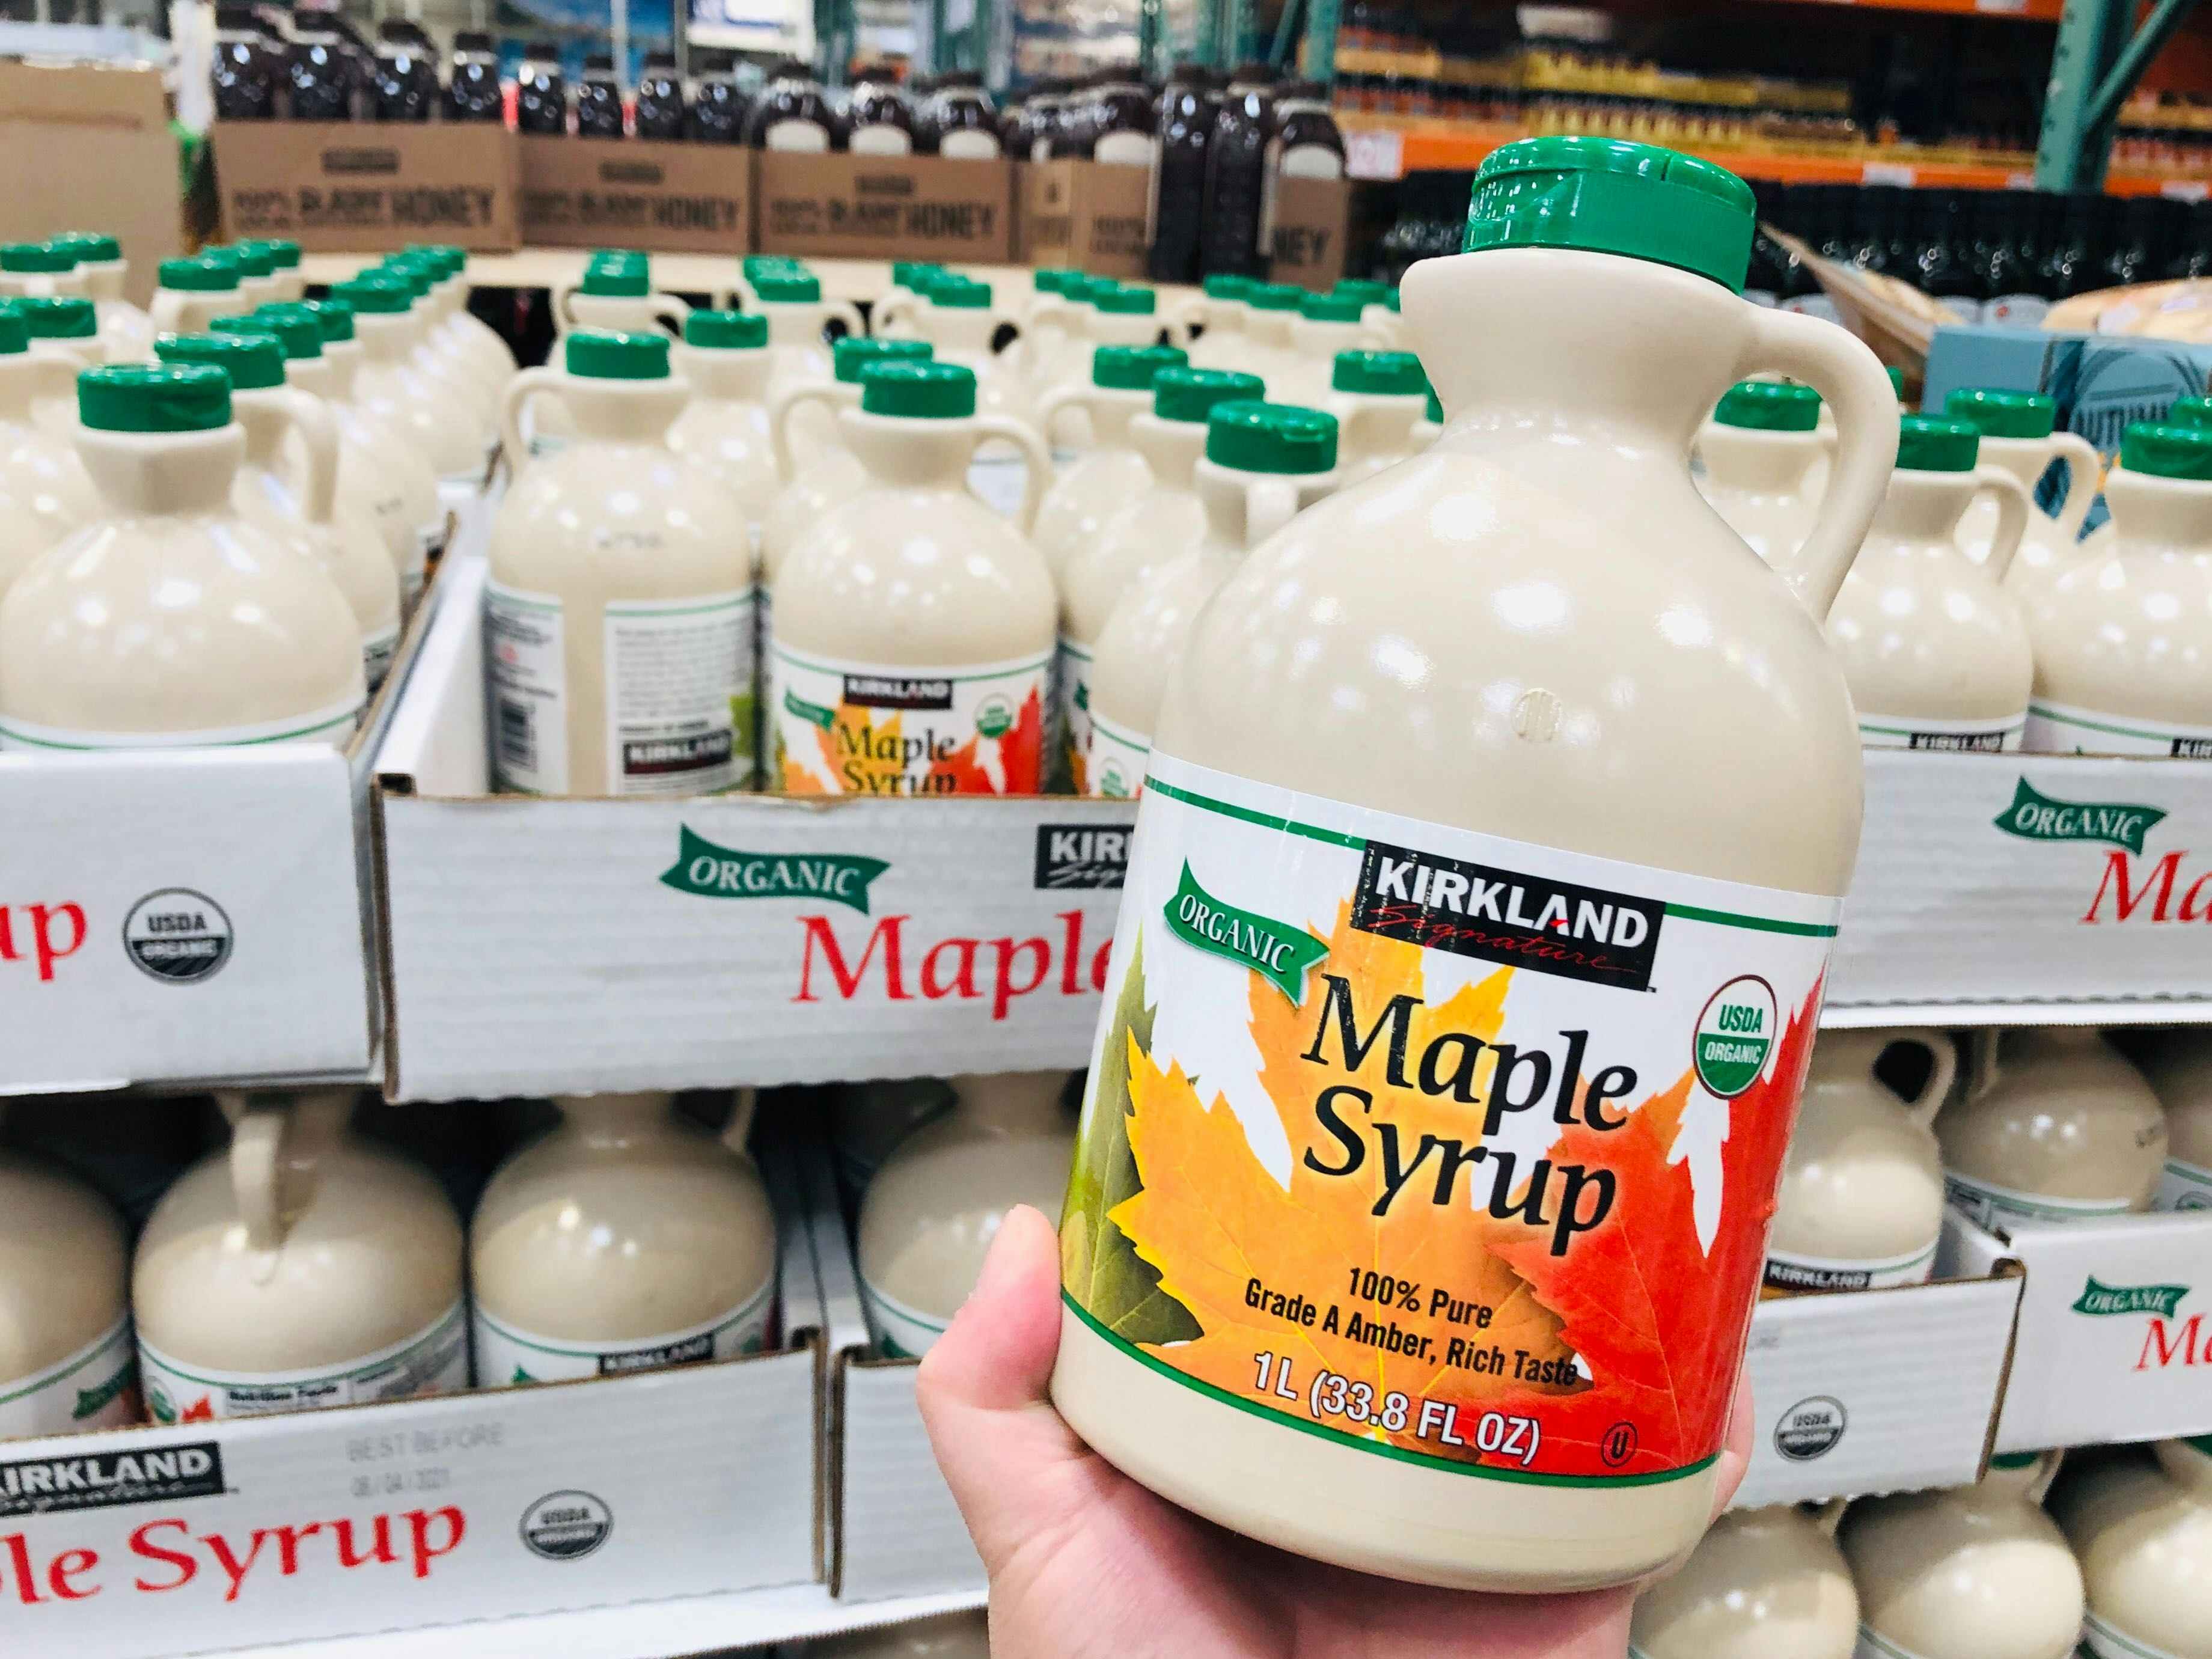 Kirkland Maple Syrup held in front of pallet of maple syrup